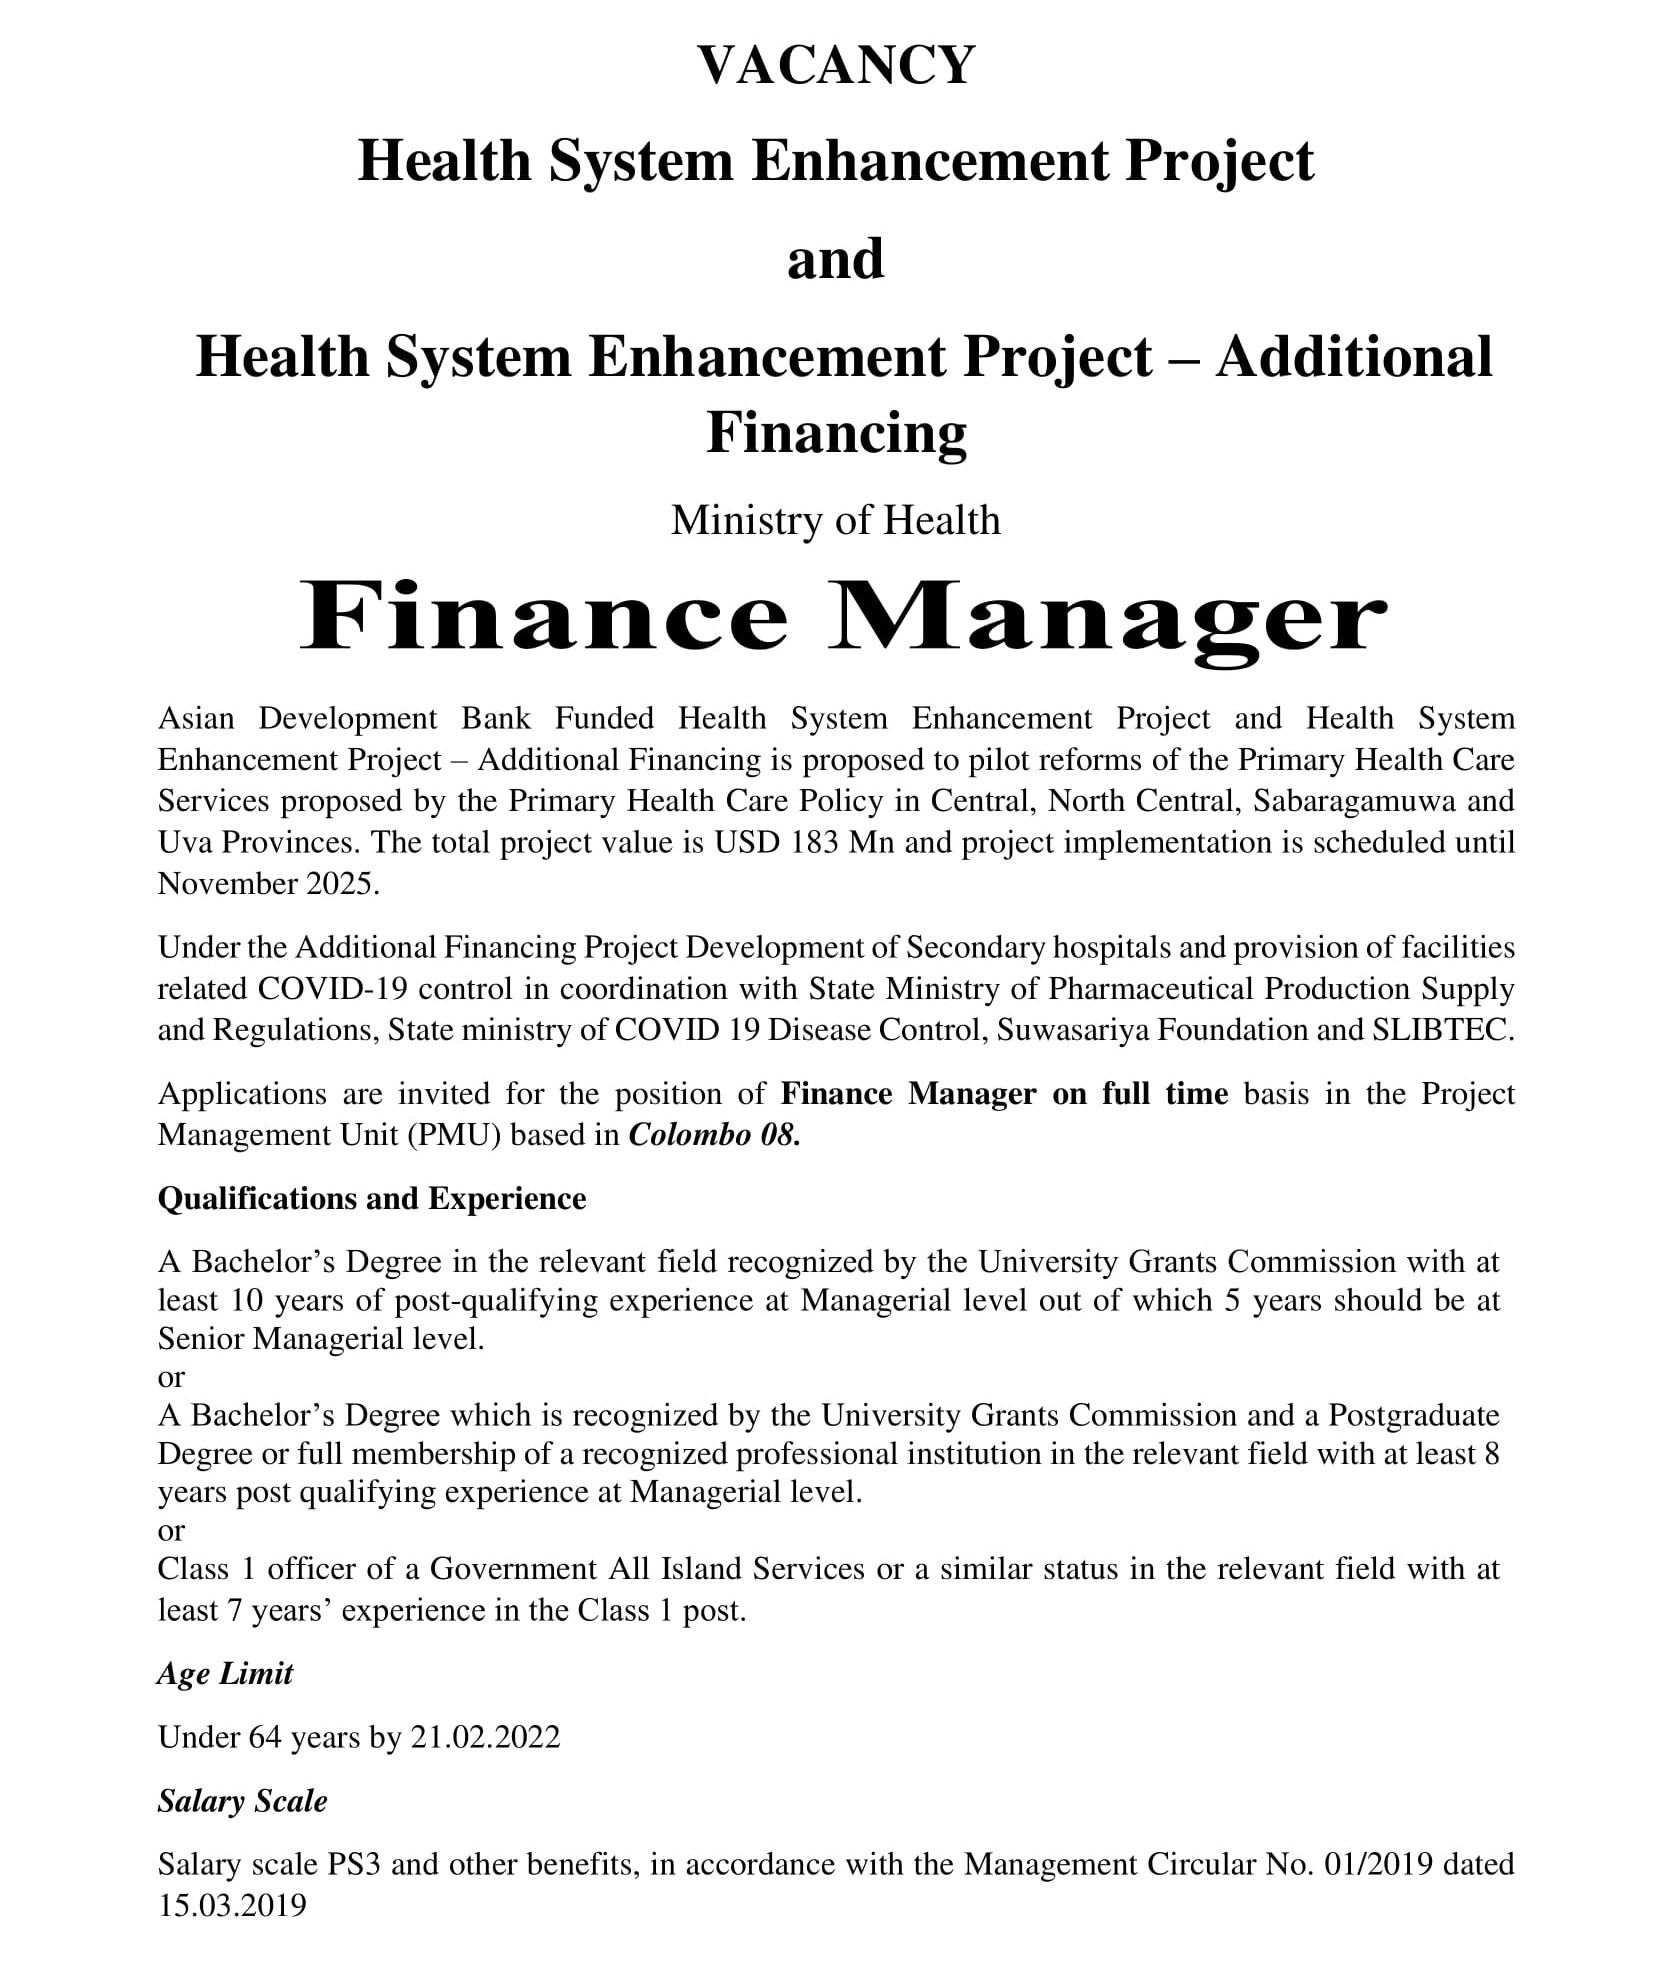 Finance Manager Vacancy at Ministry of Health in Central Province